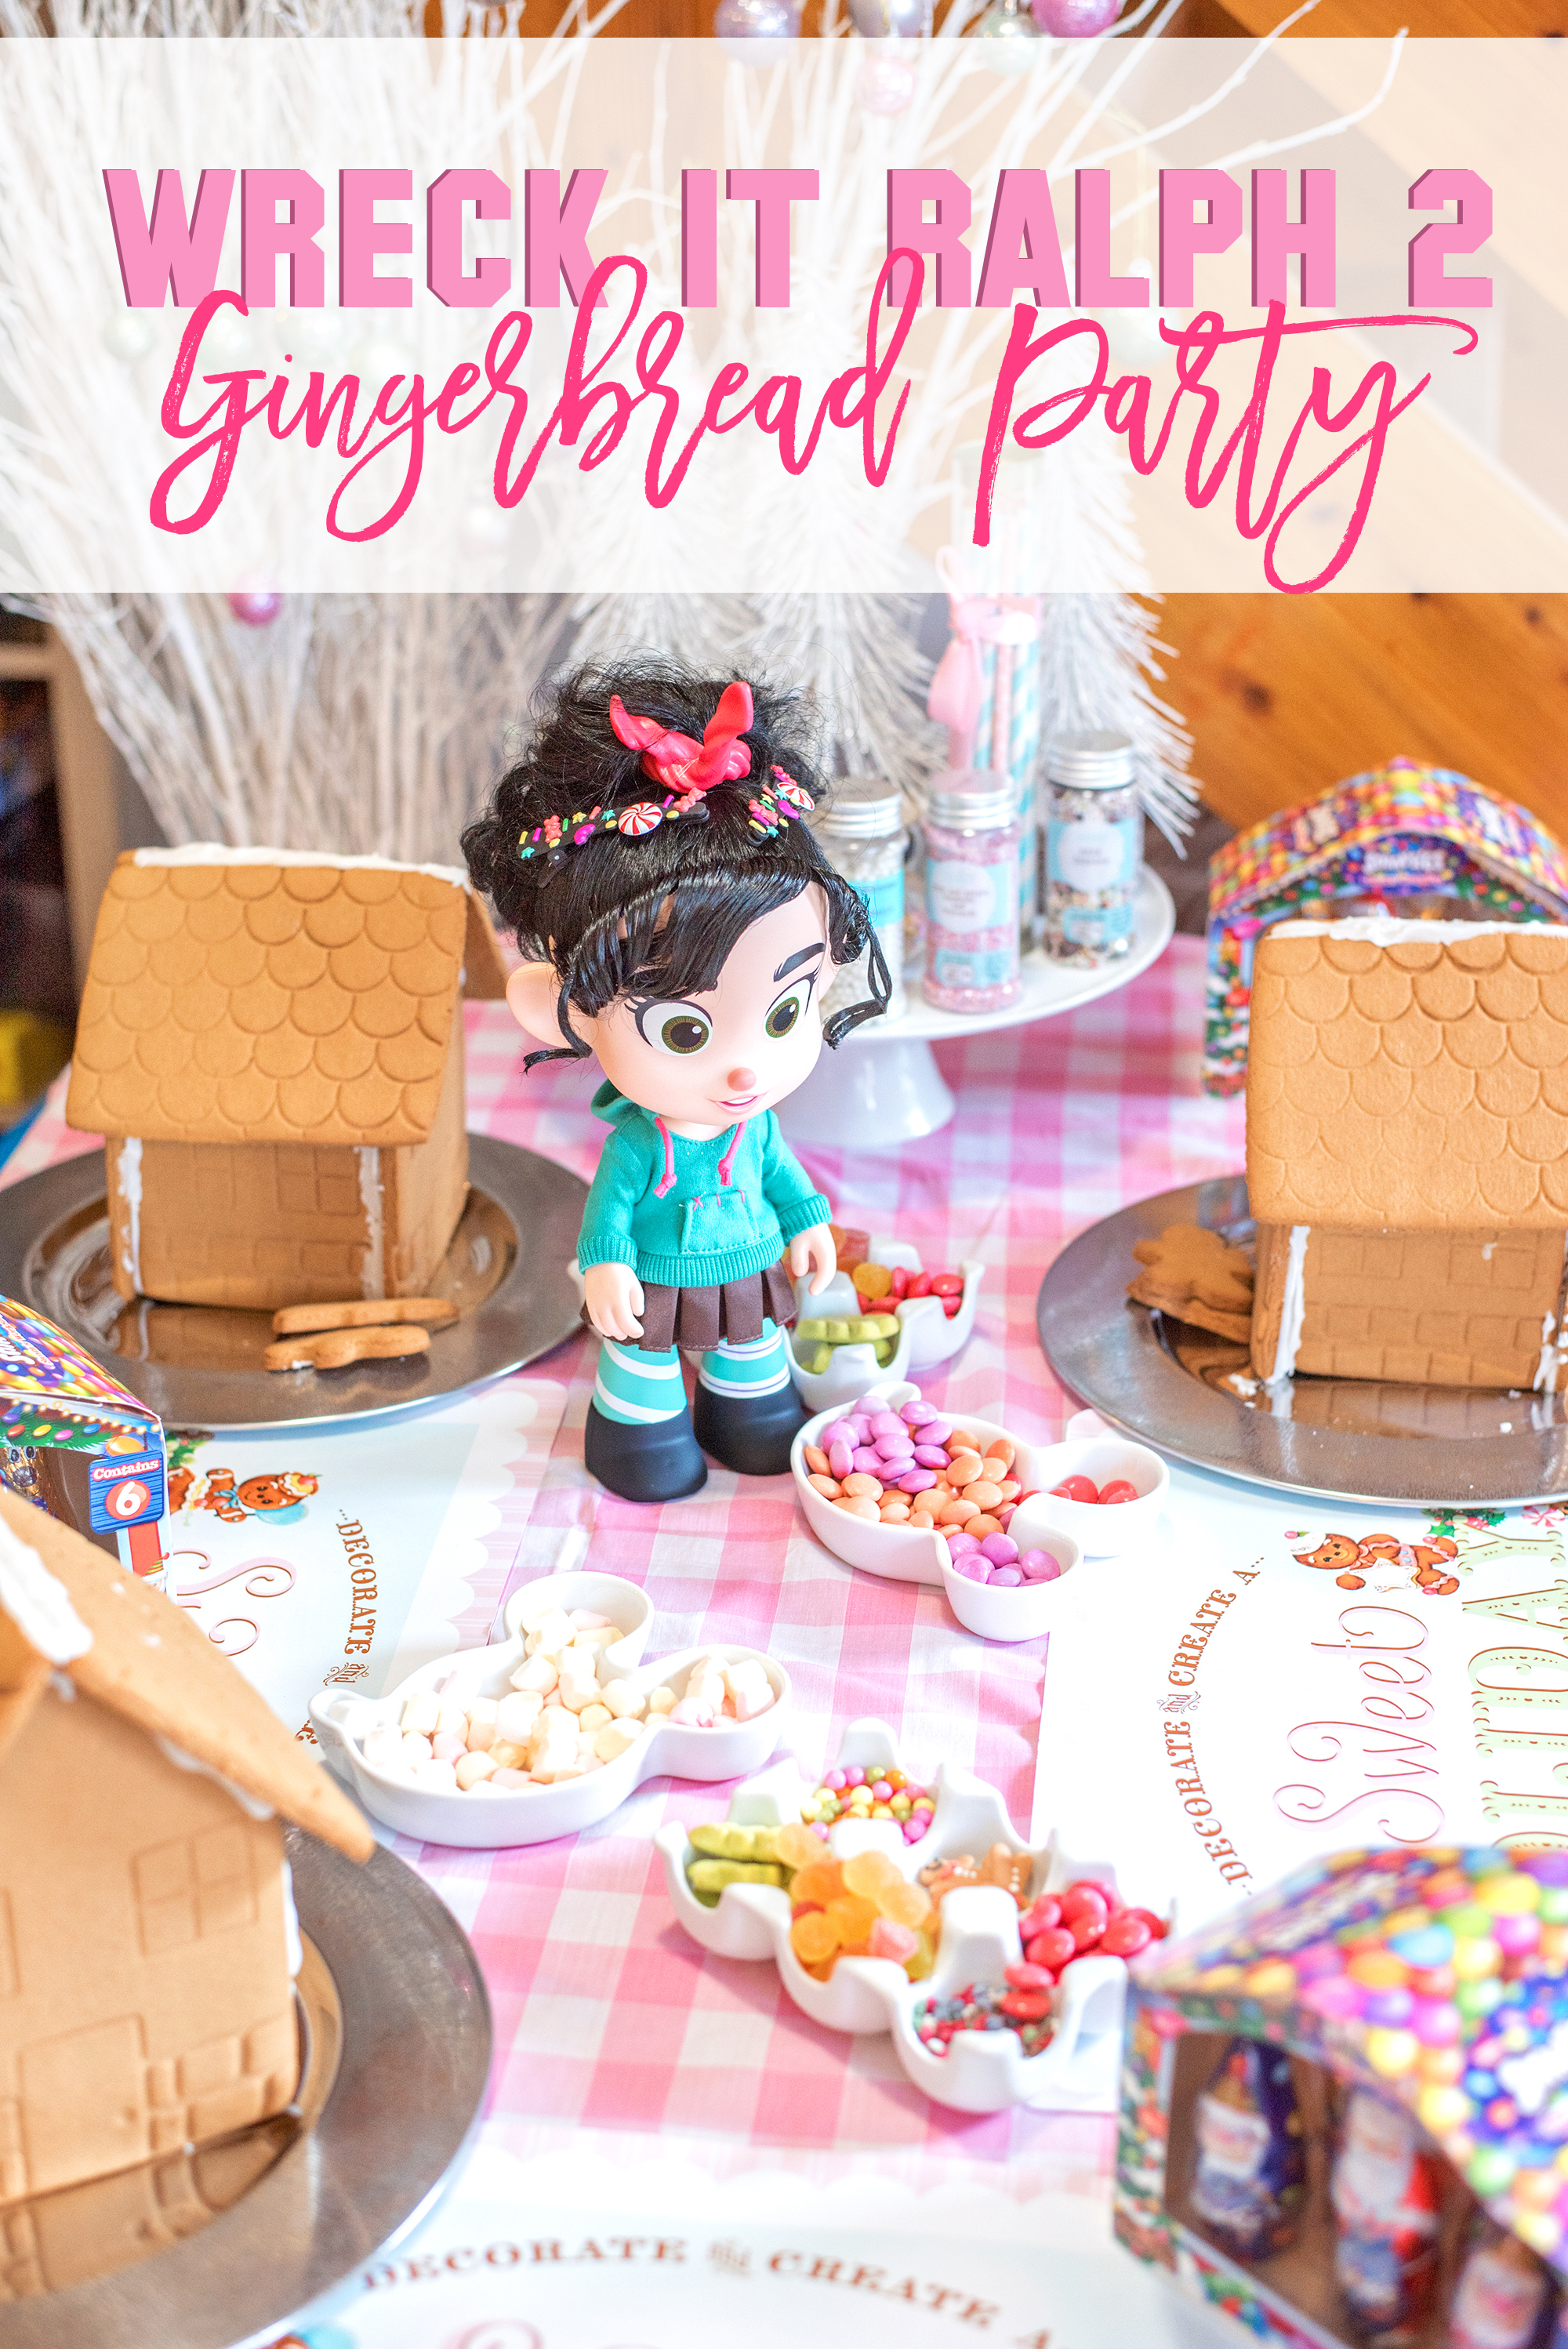 Disney’s Wreck-It Ralph Gingerbread Party